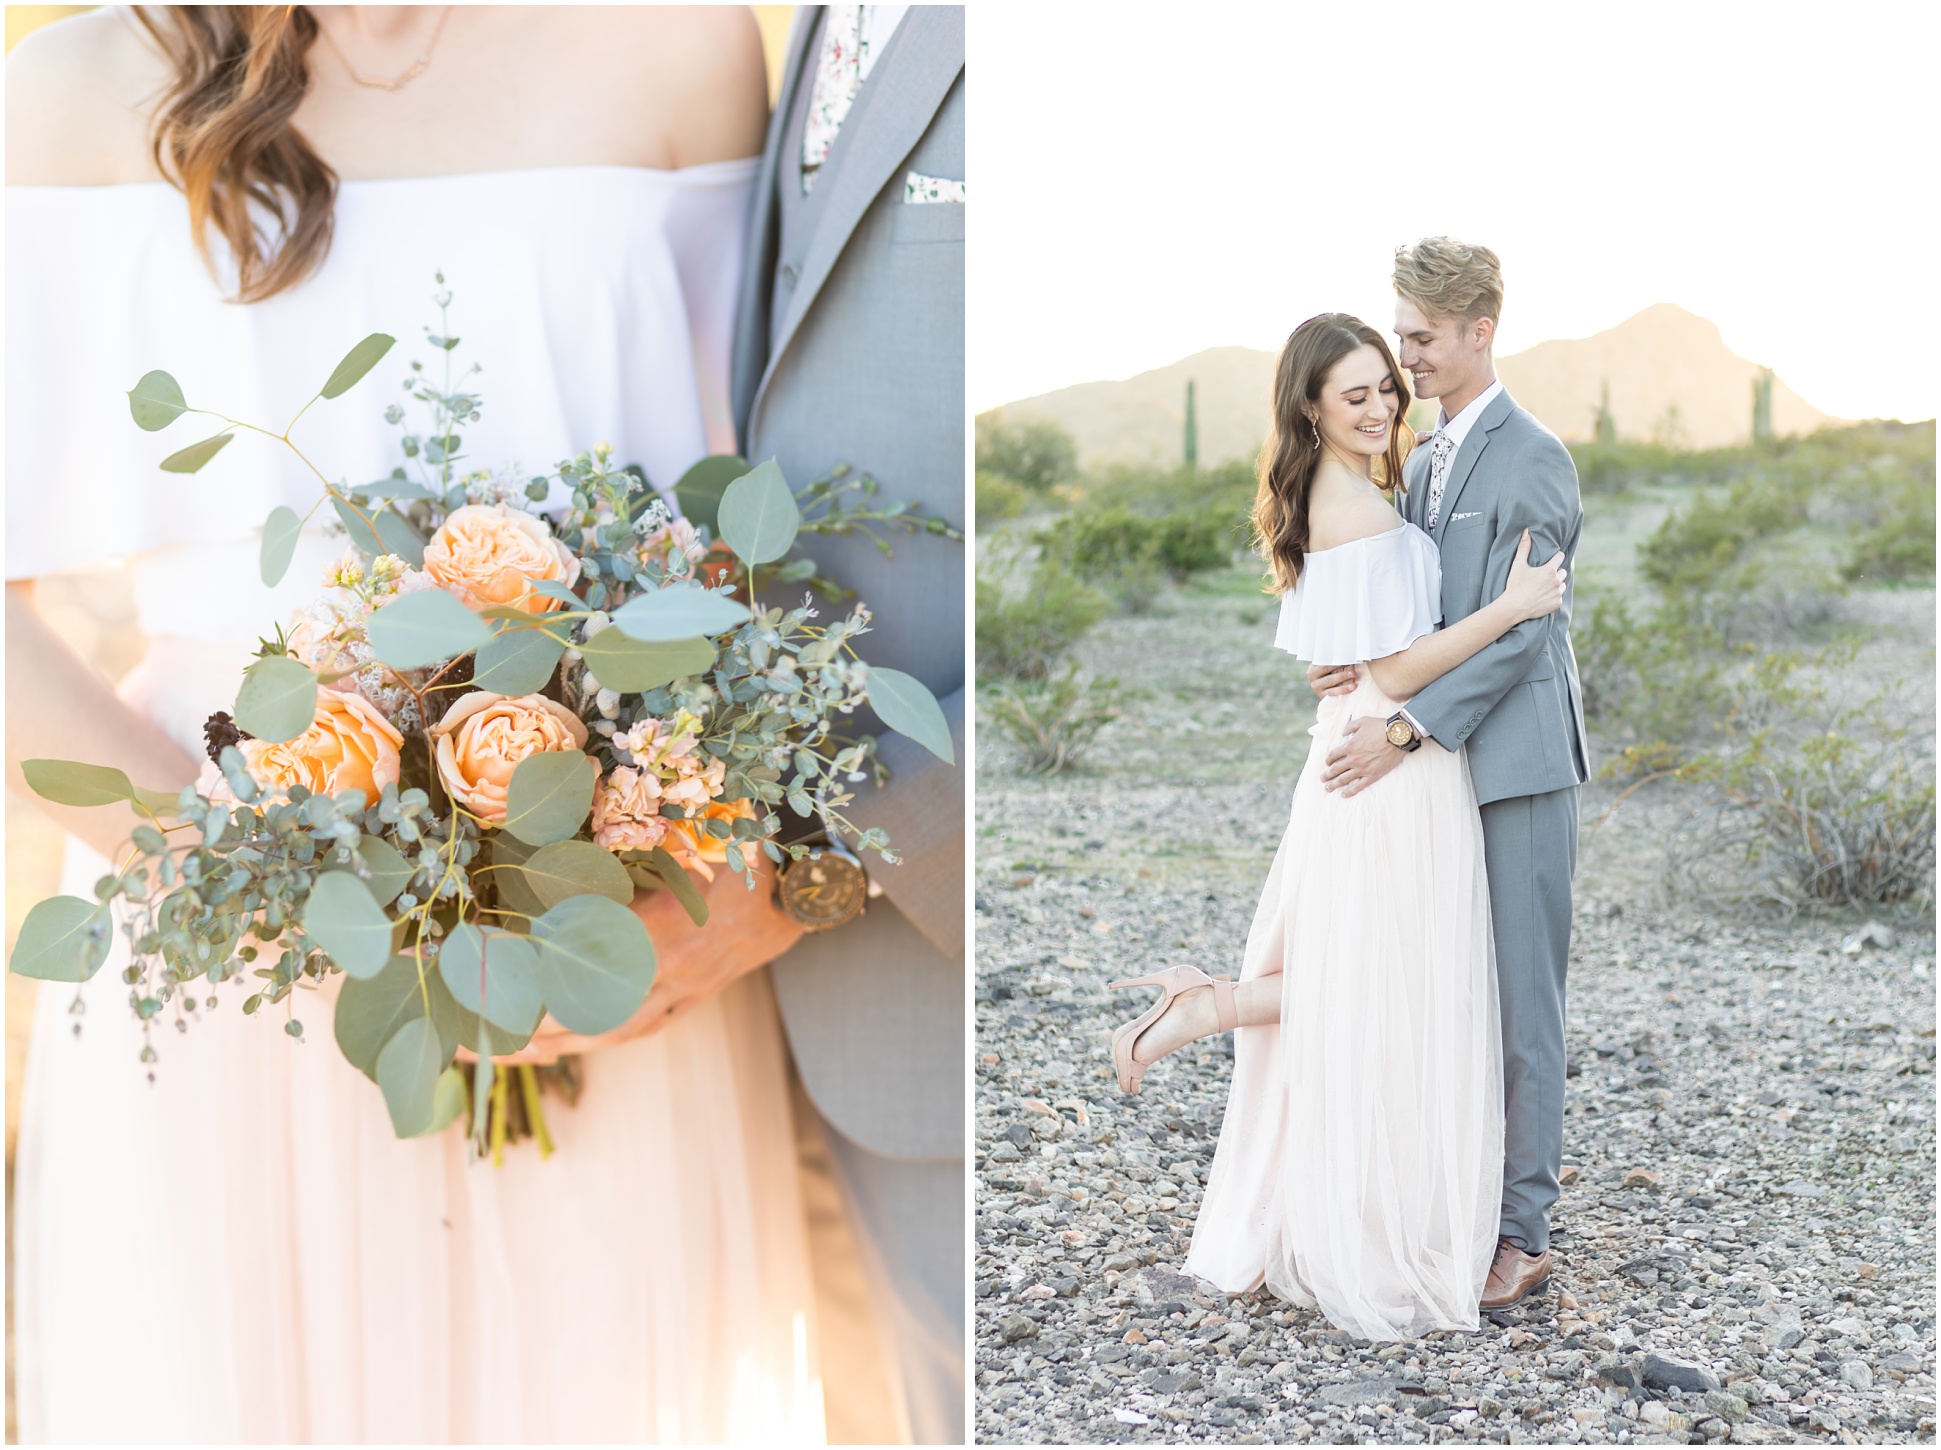 Left Image: Bouquet, Right Image: Bride and Groom chest to chest